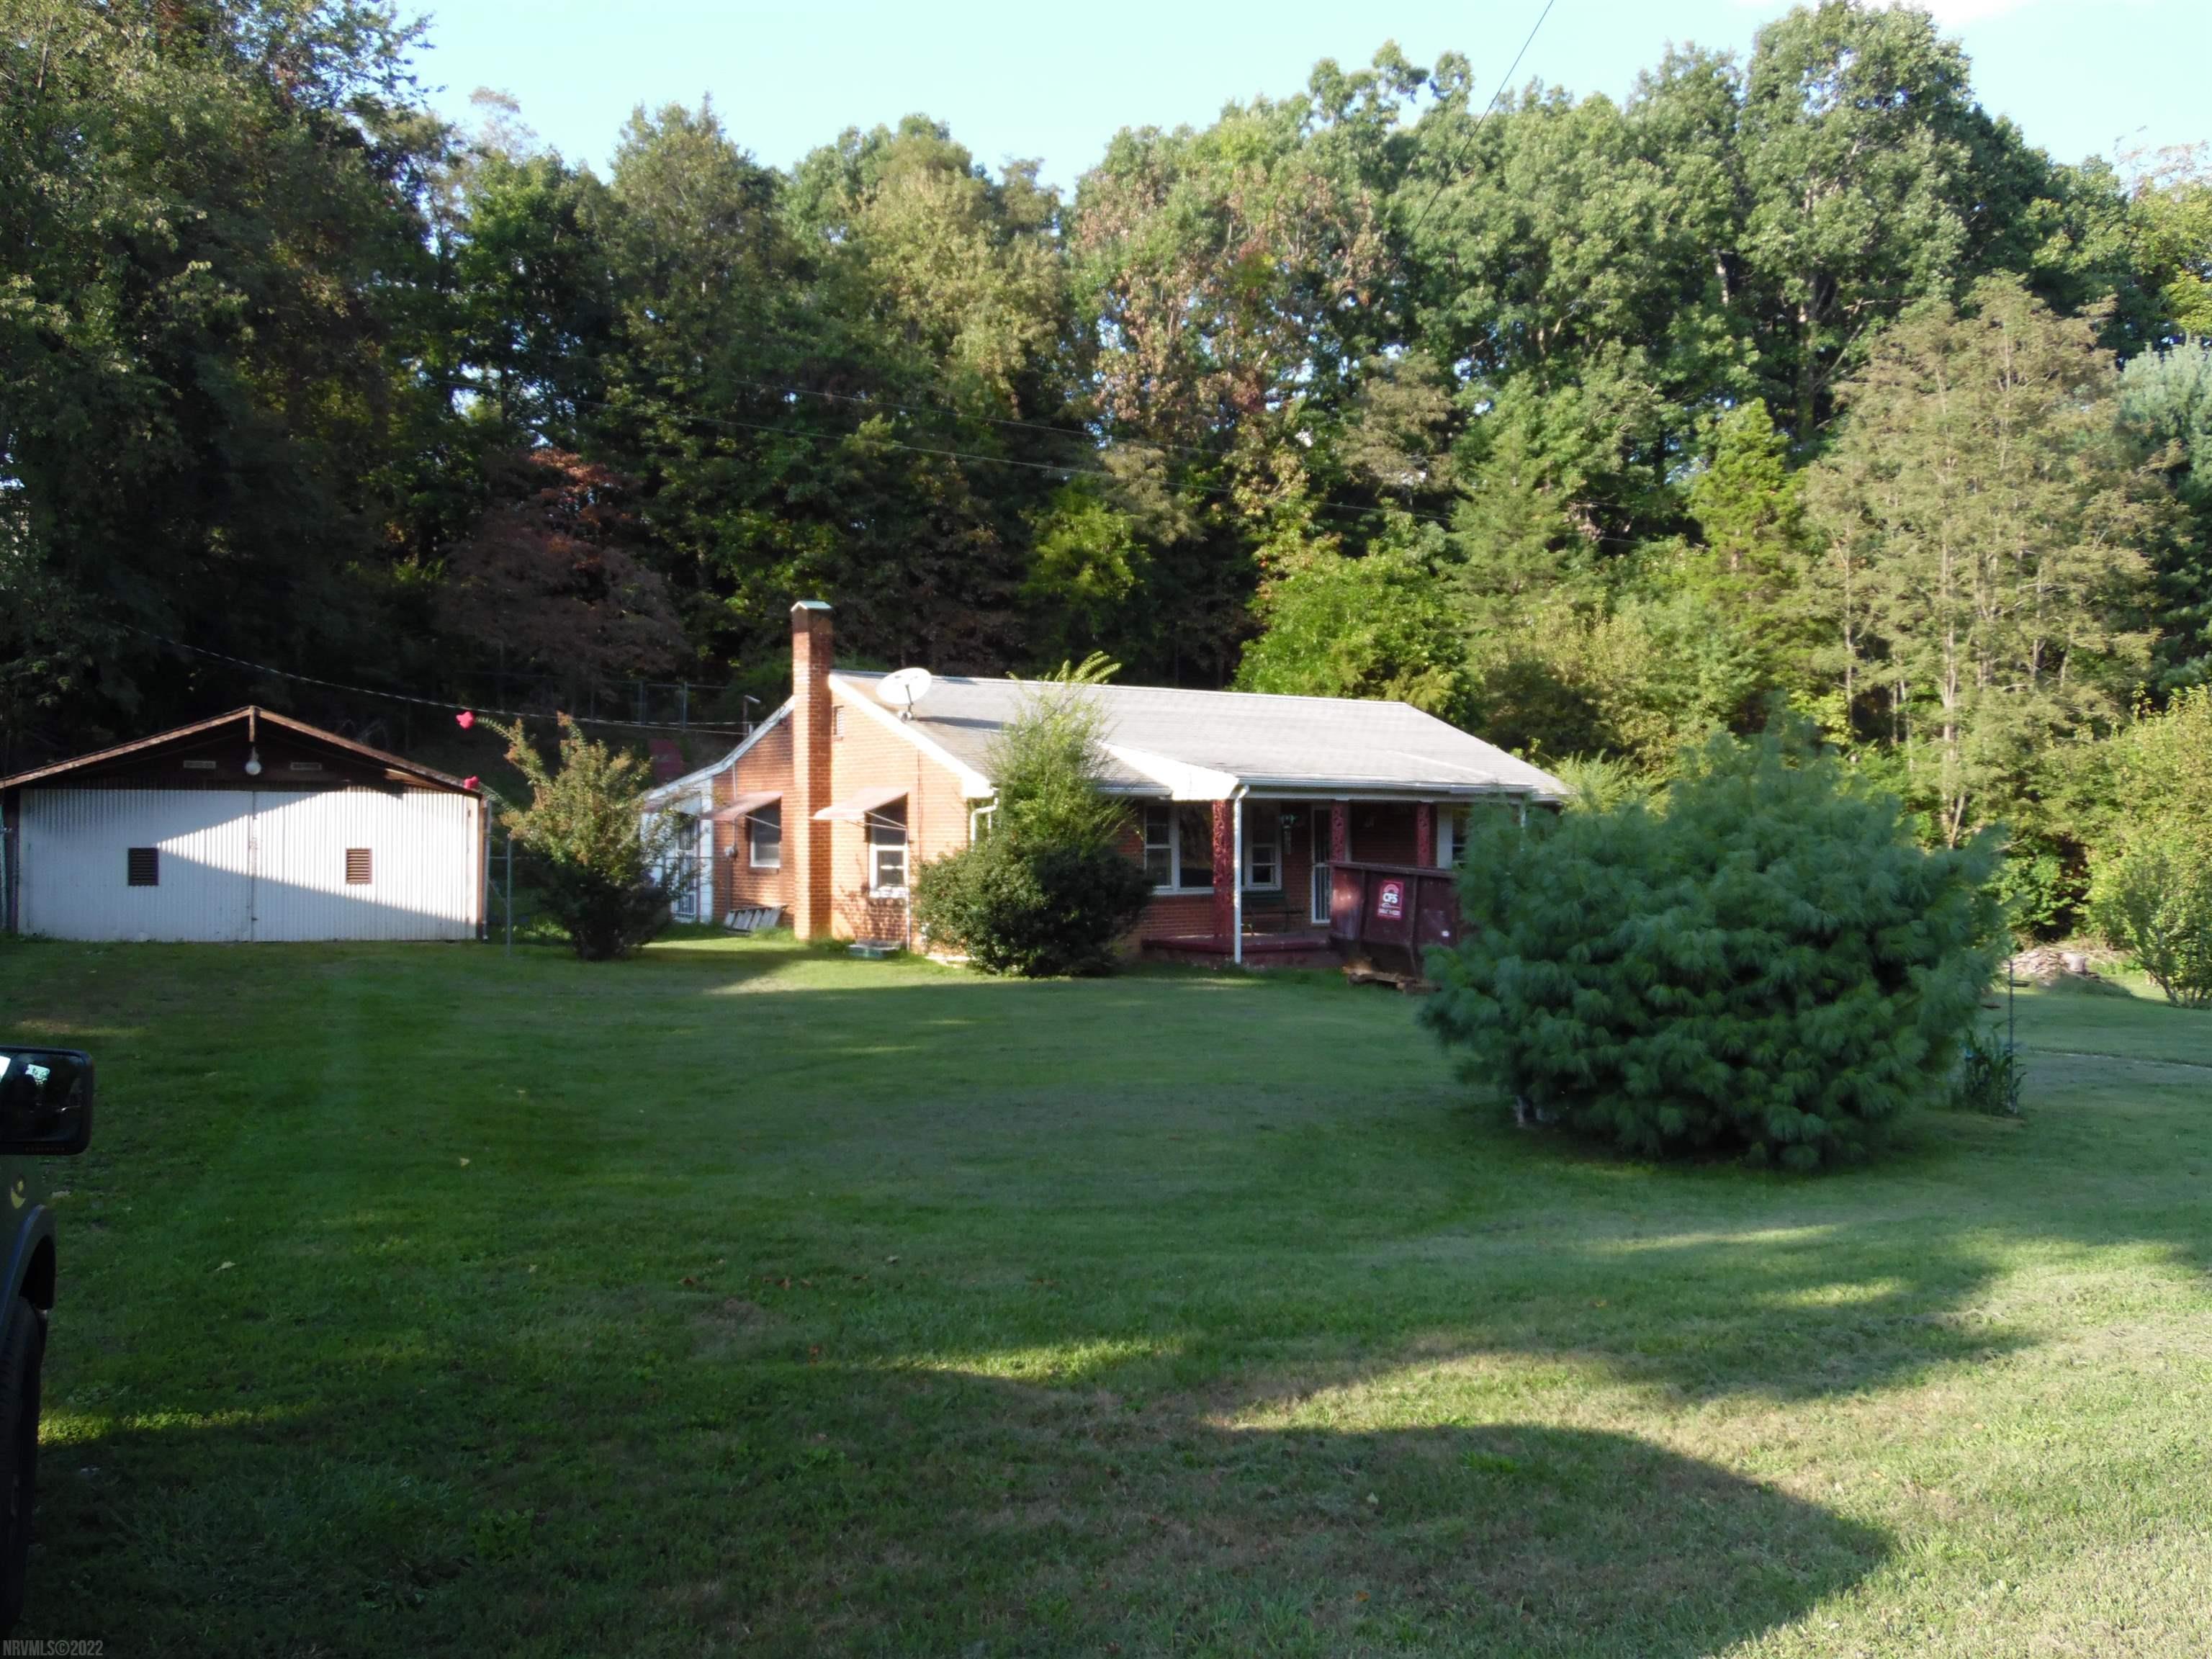 This three bedroom one bath home on a level lot just outside of the Christiansburg town limits needs a new owner to work on it and bring it up to date. This home has a full basement for storage and a oversize three car garage. Fenced in back yard.